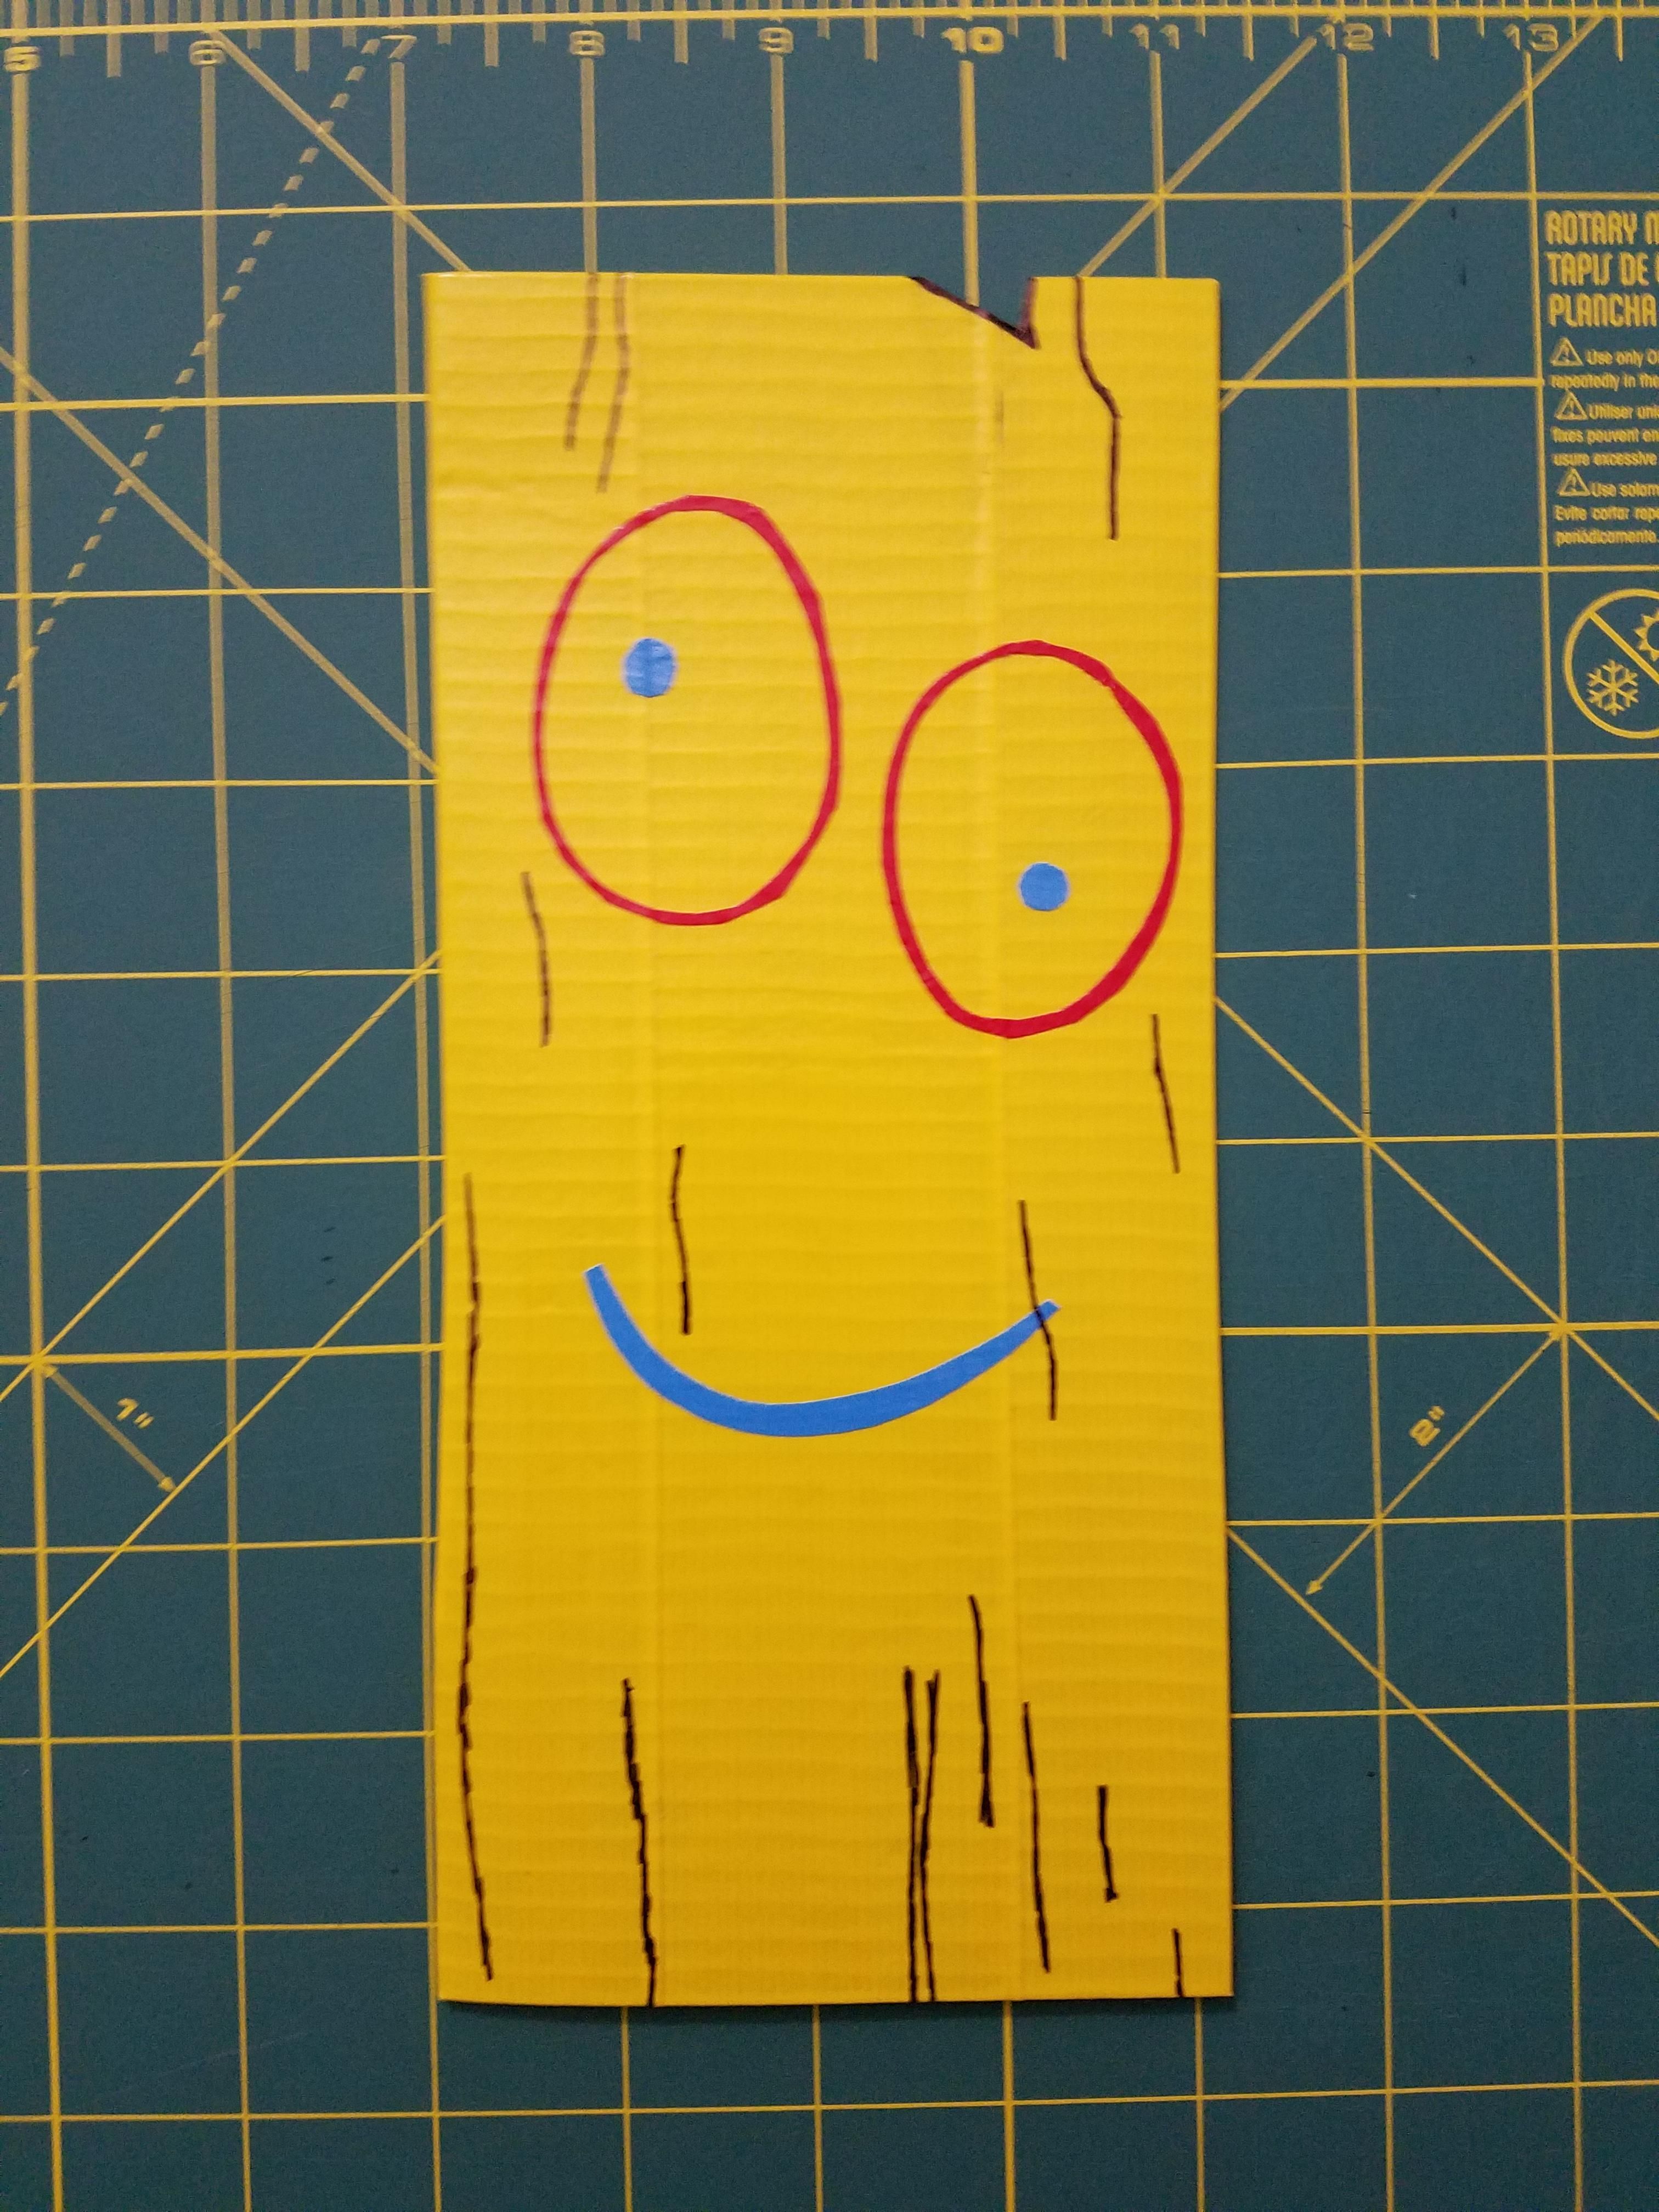 Throwback. Plank from Ed Edd and Eddy made with duct tape